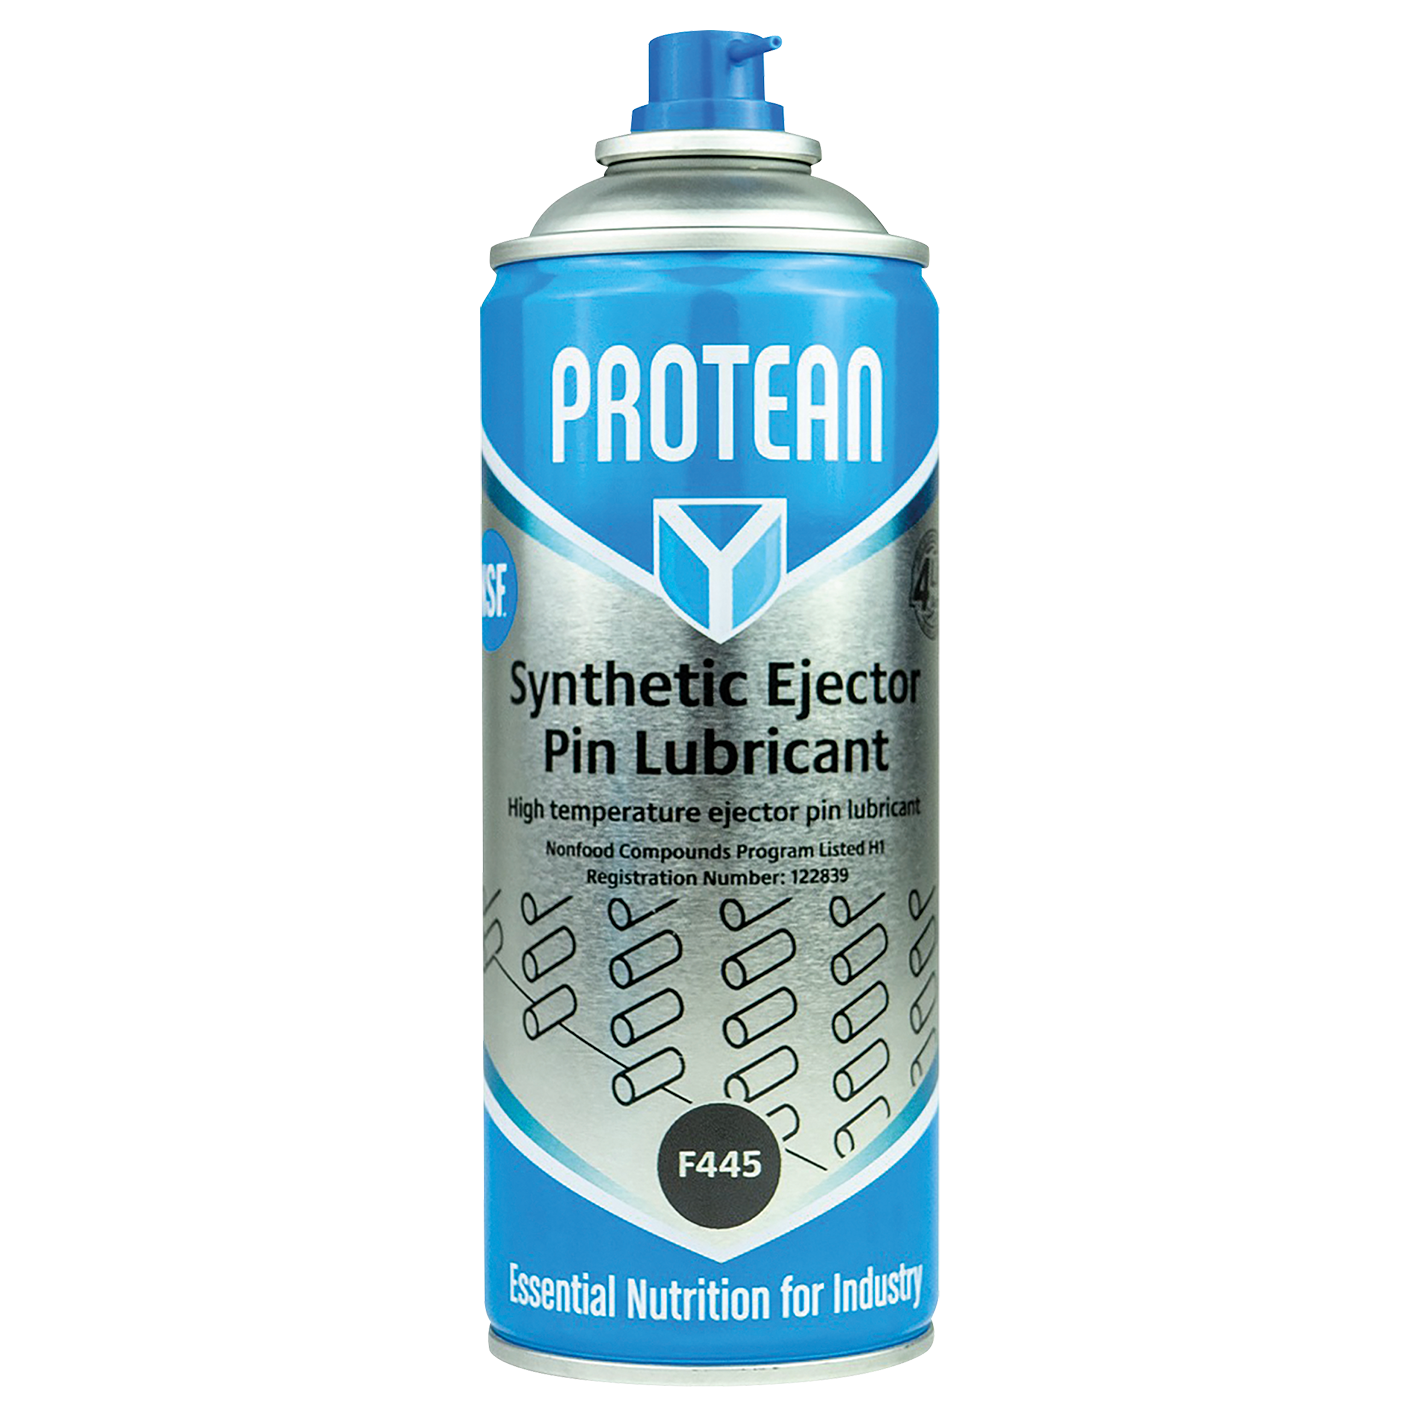 PROTEAN SYNTHETIC EJECTOR PIN LUBRICANT